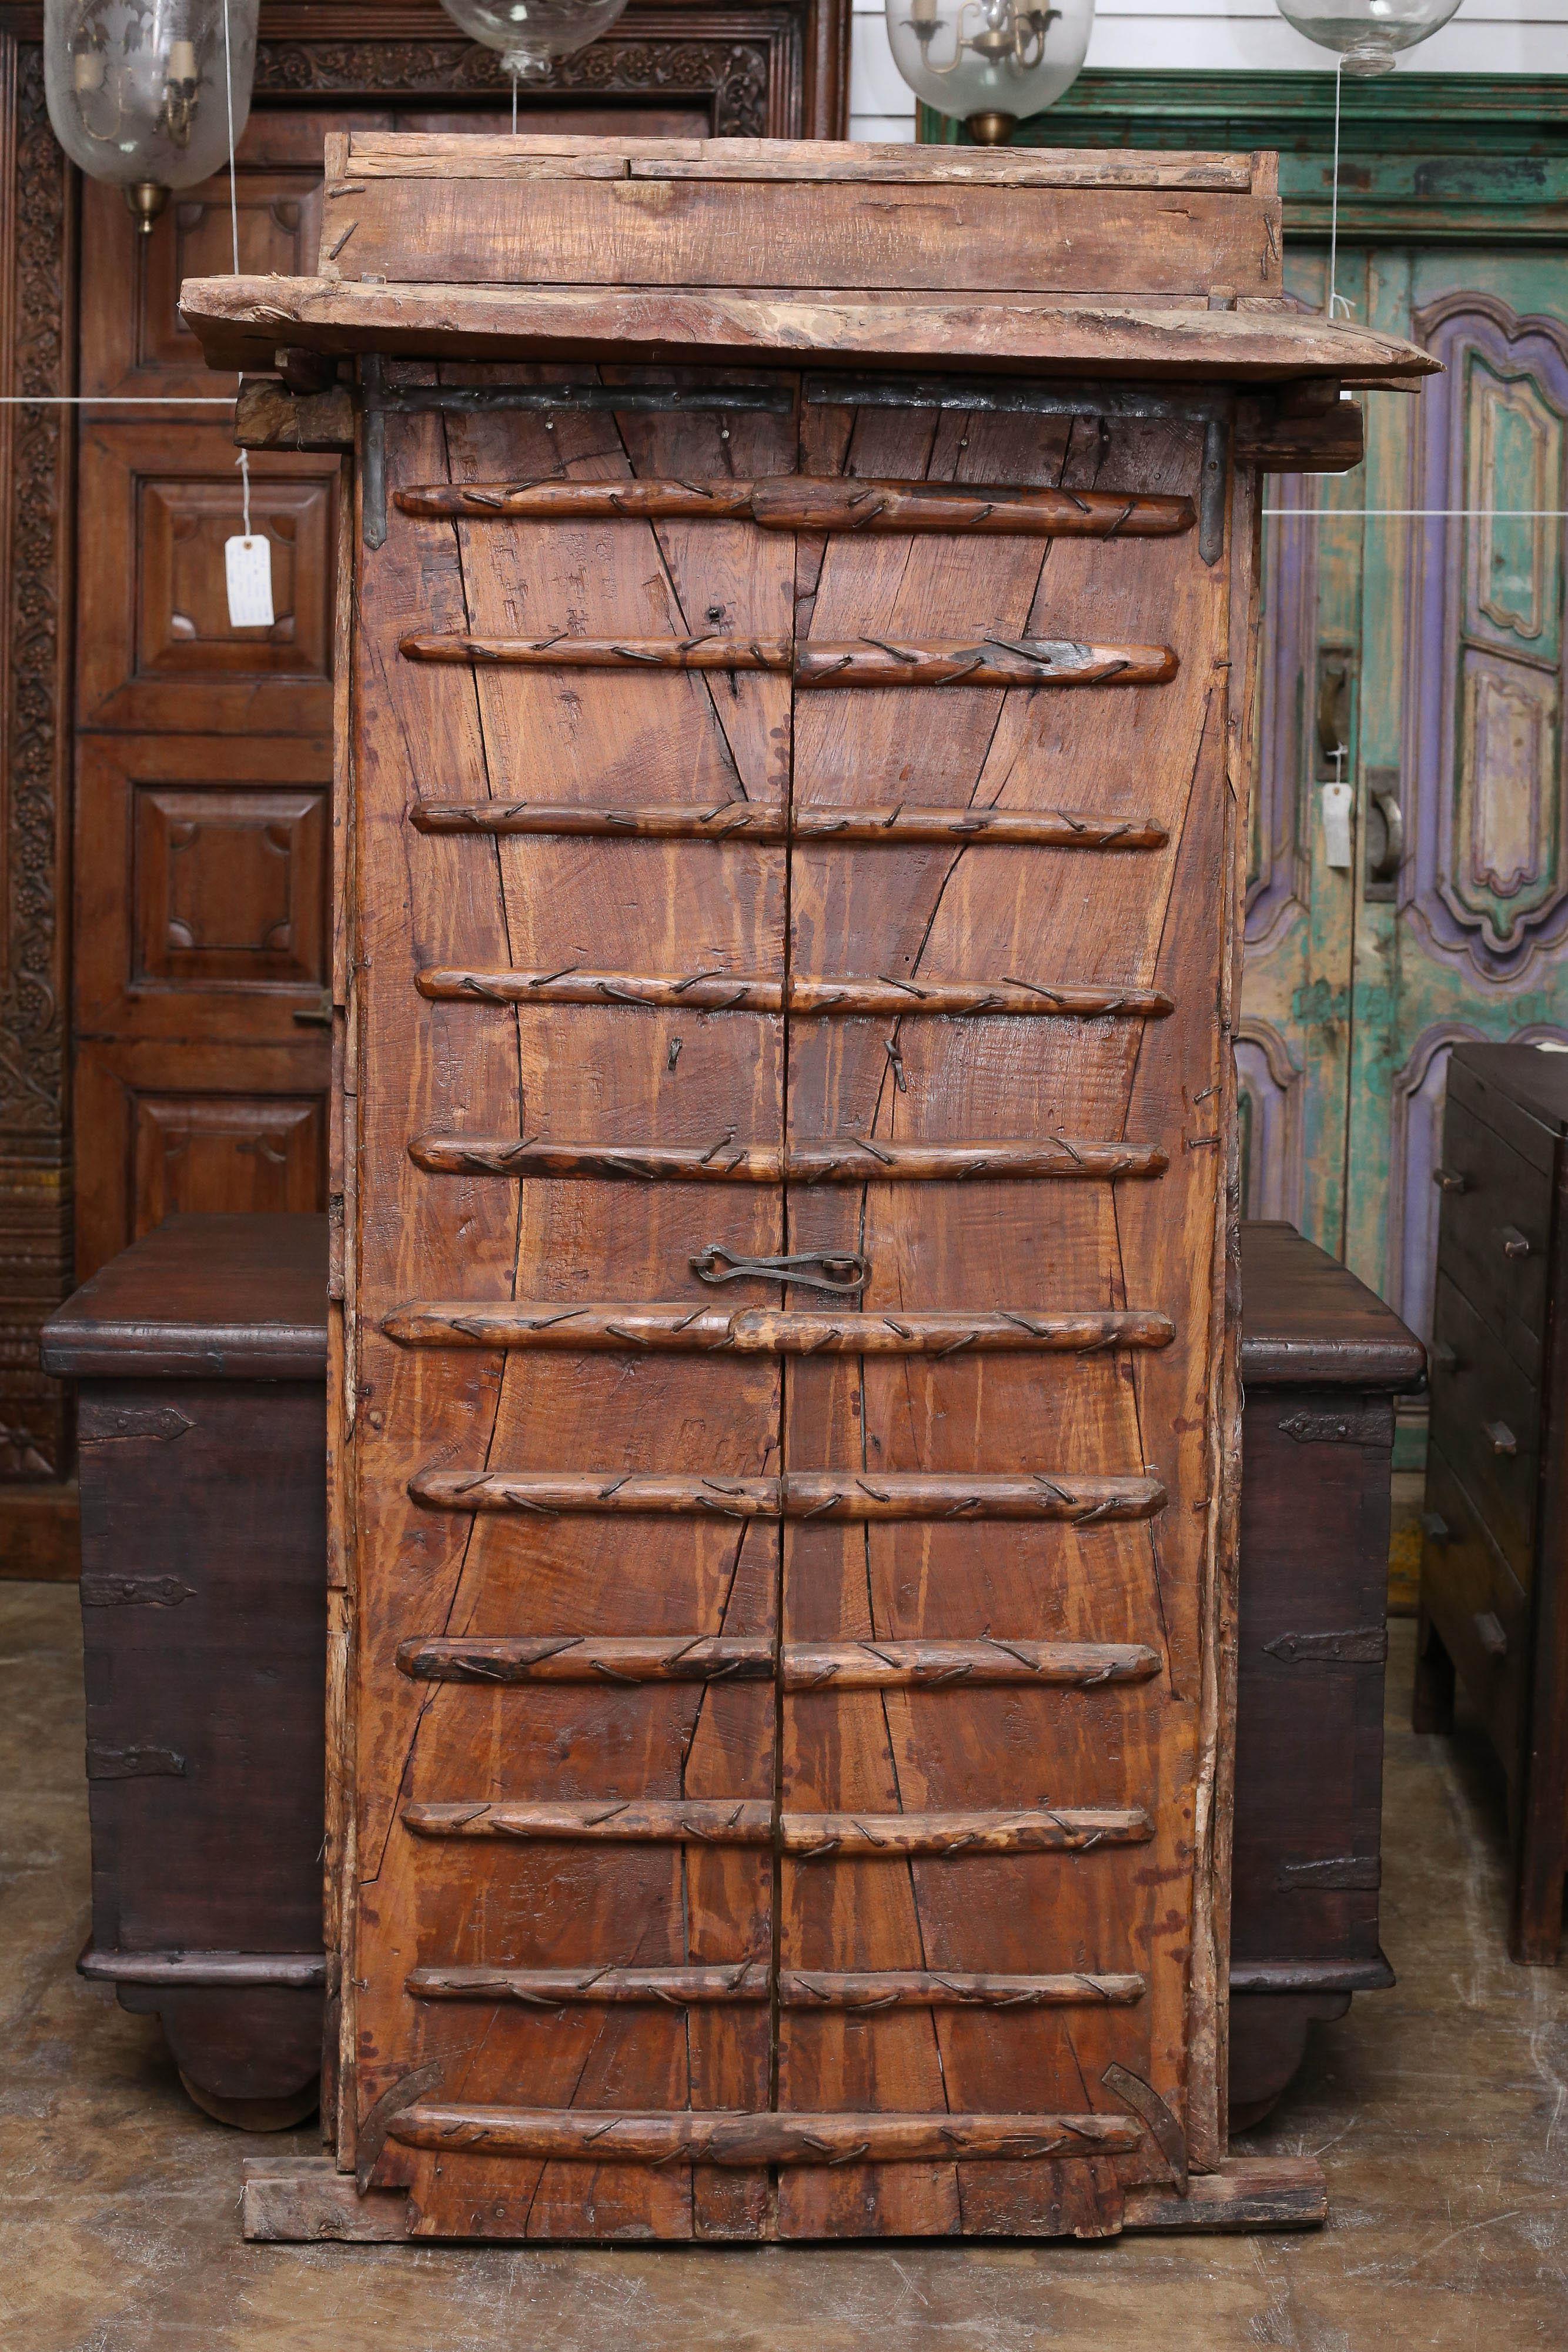 Early 19th Century 1810s Solid Teak Wood and Metal Works Kitchen Door from the Farm House in Goa